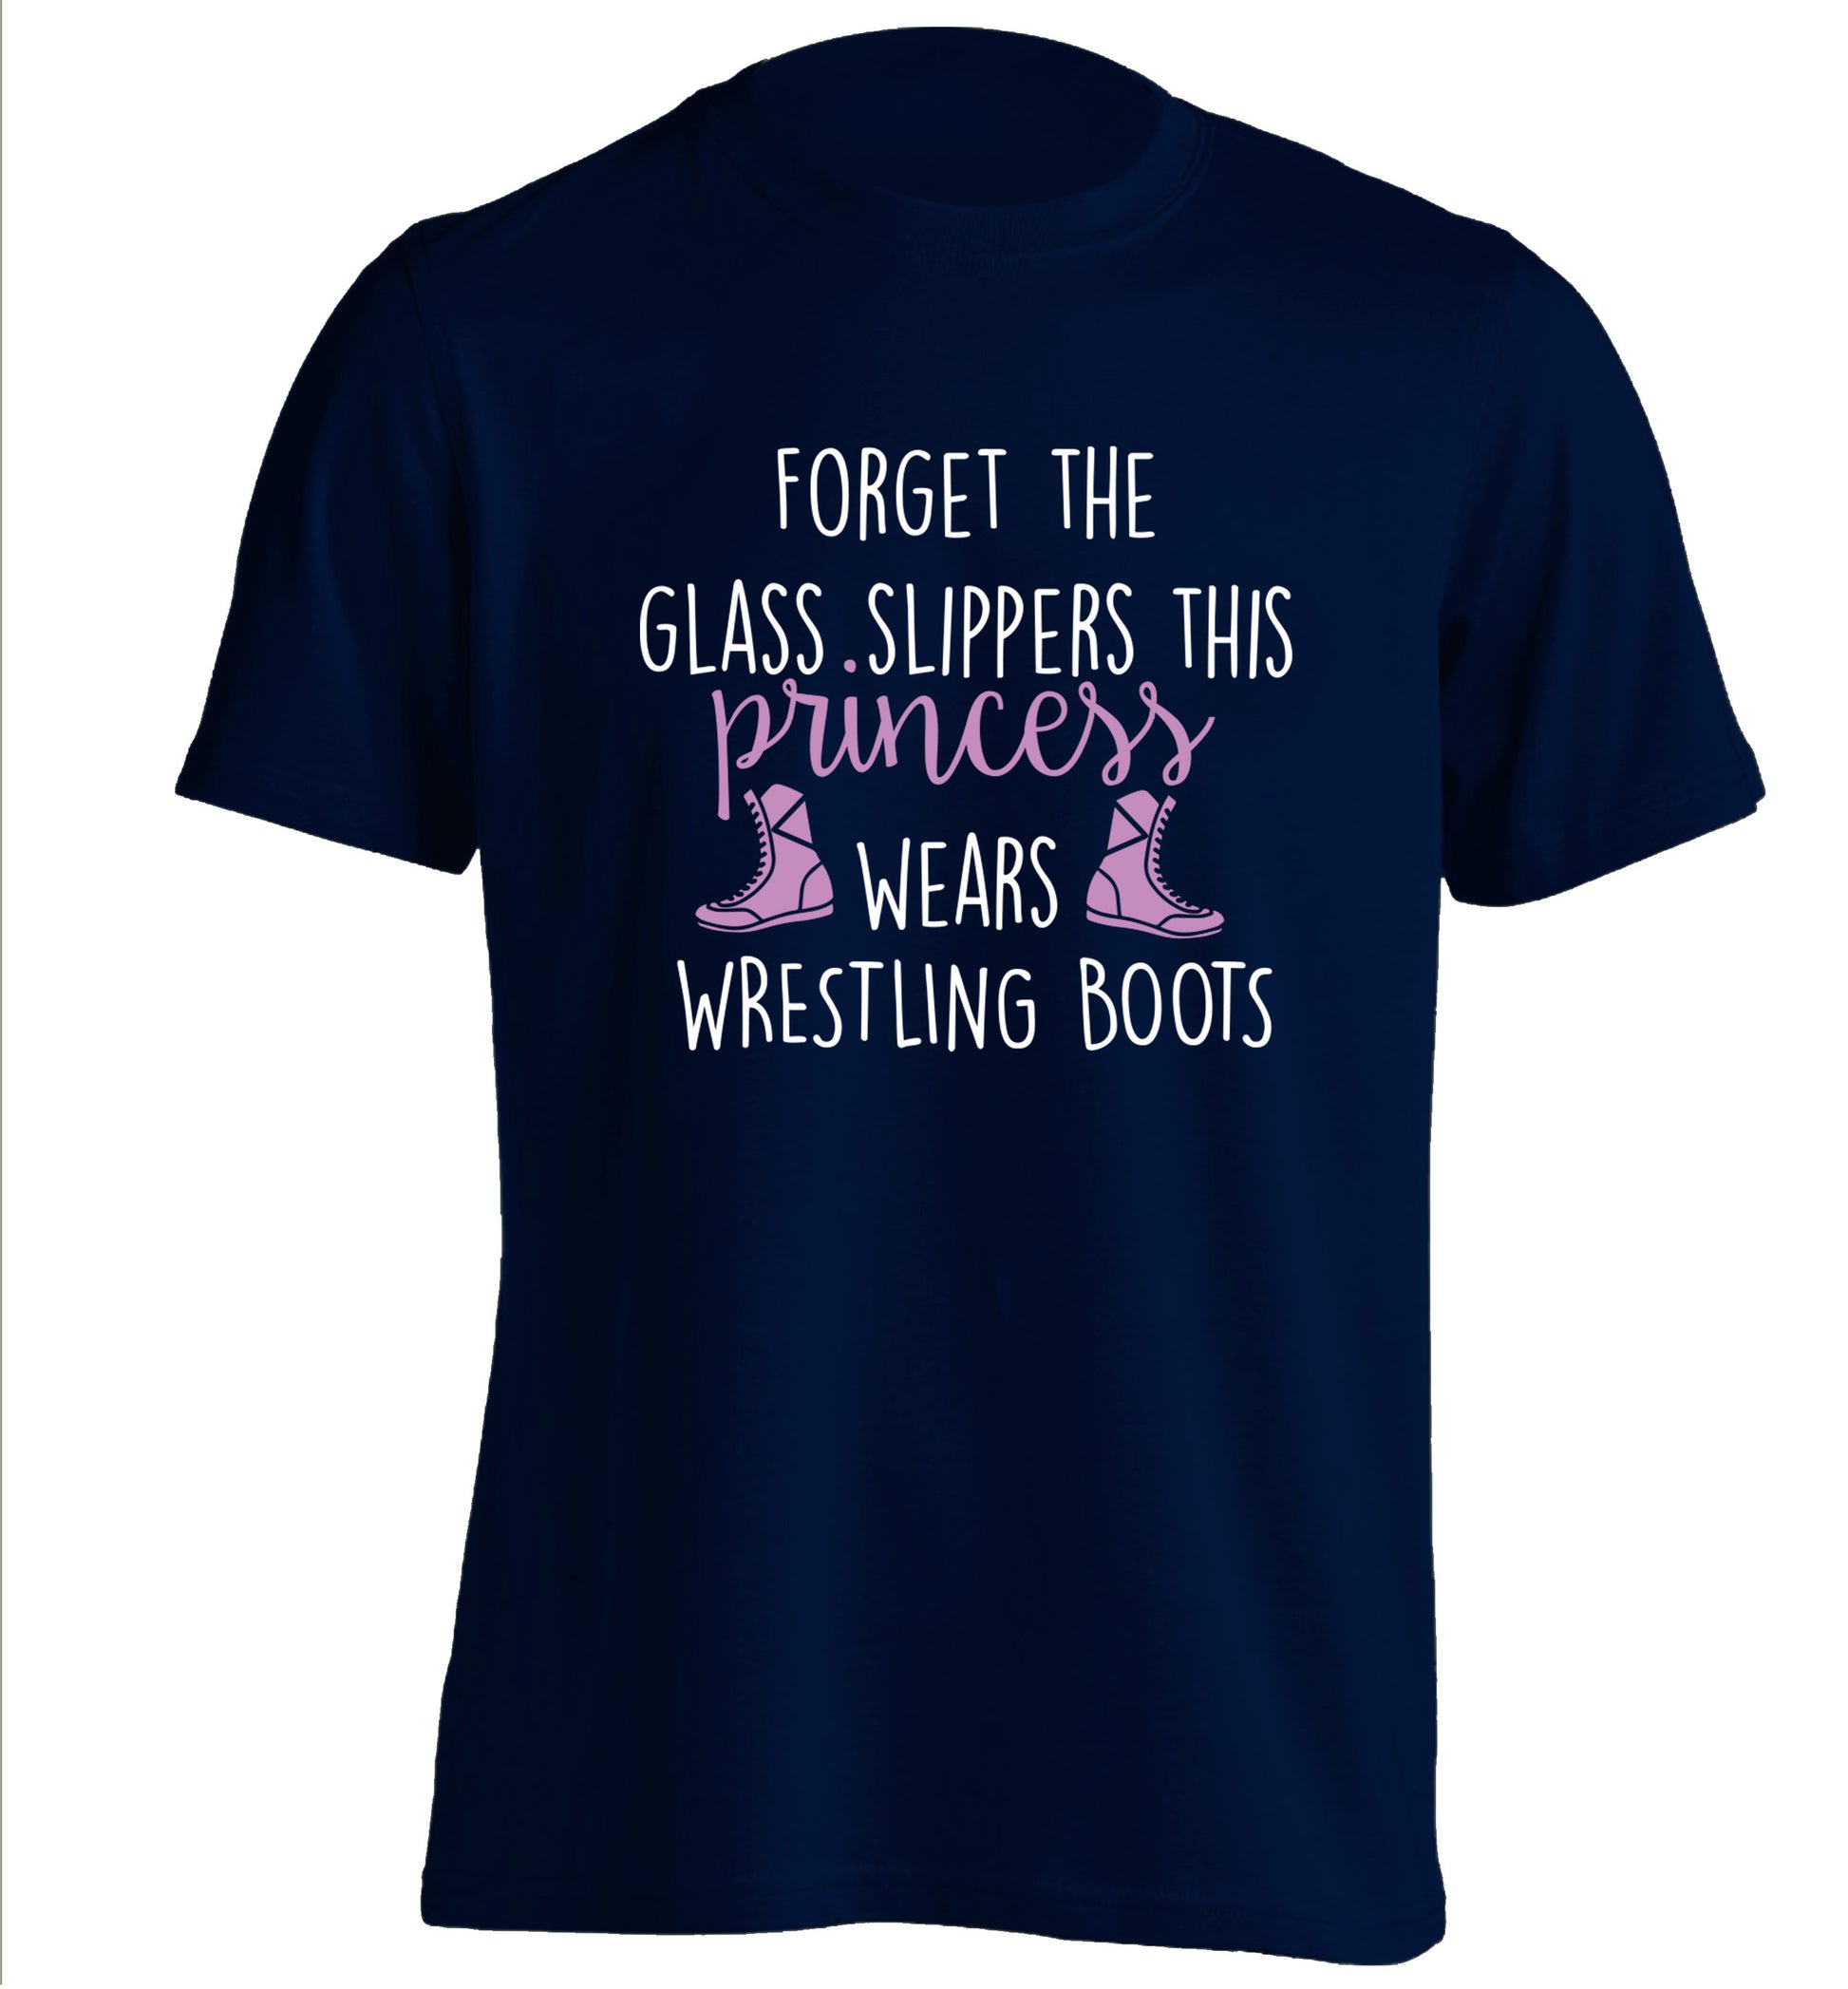 Forget the glass slippers this princess wears wrestling boots adults unisex navy Tshirt 2XL